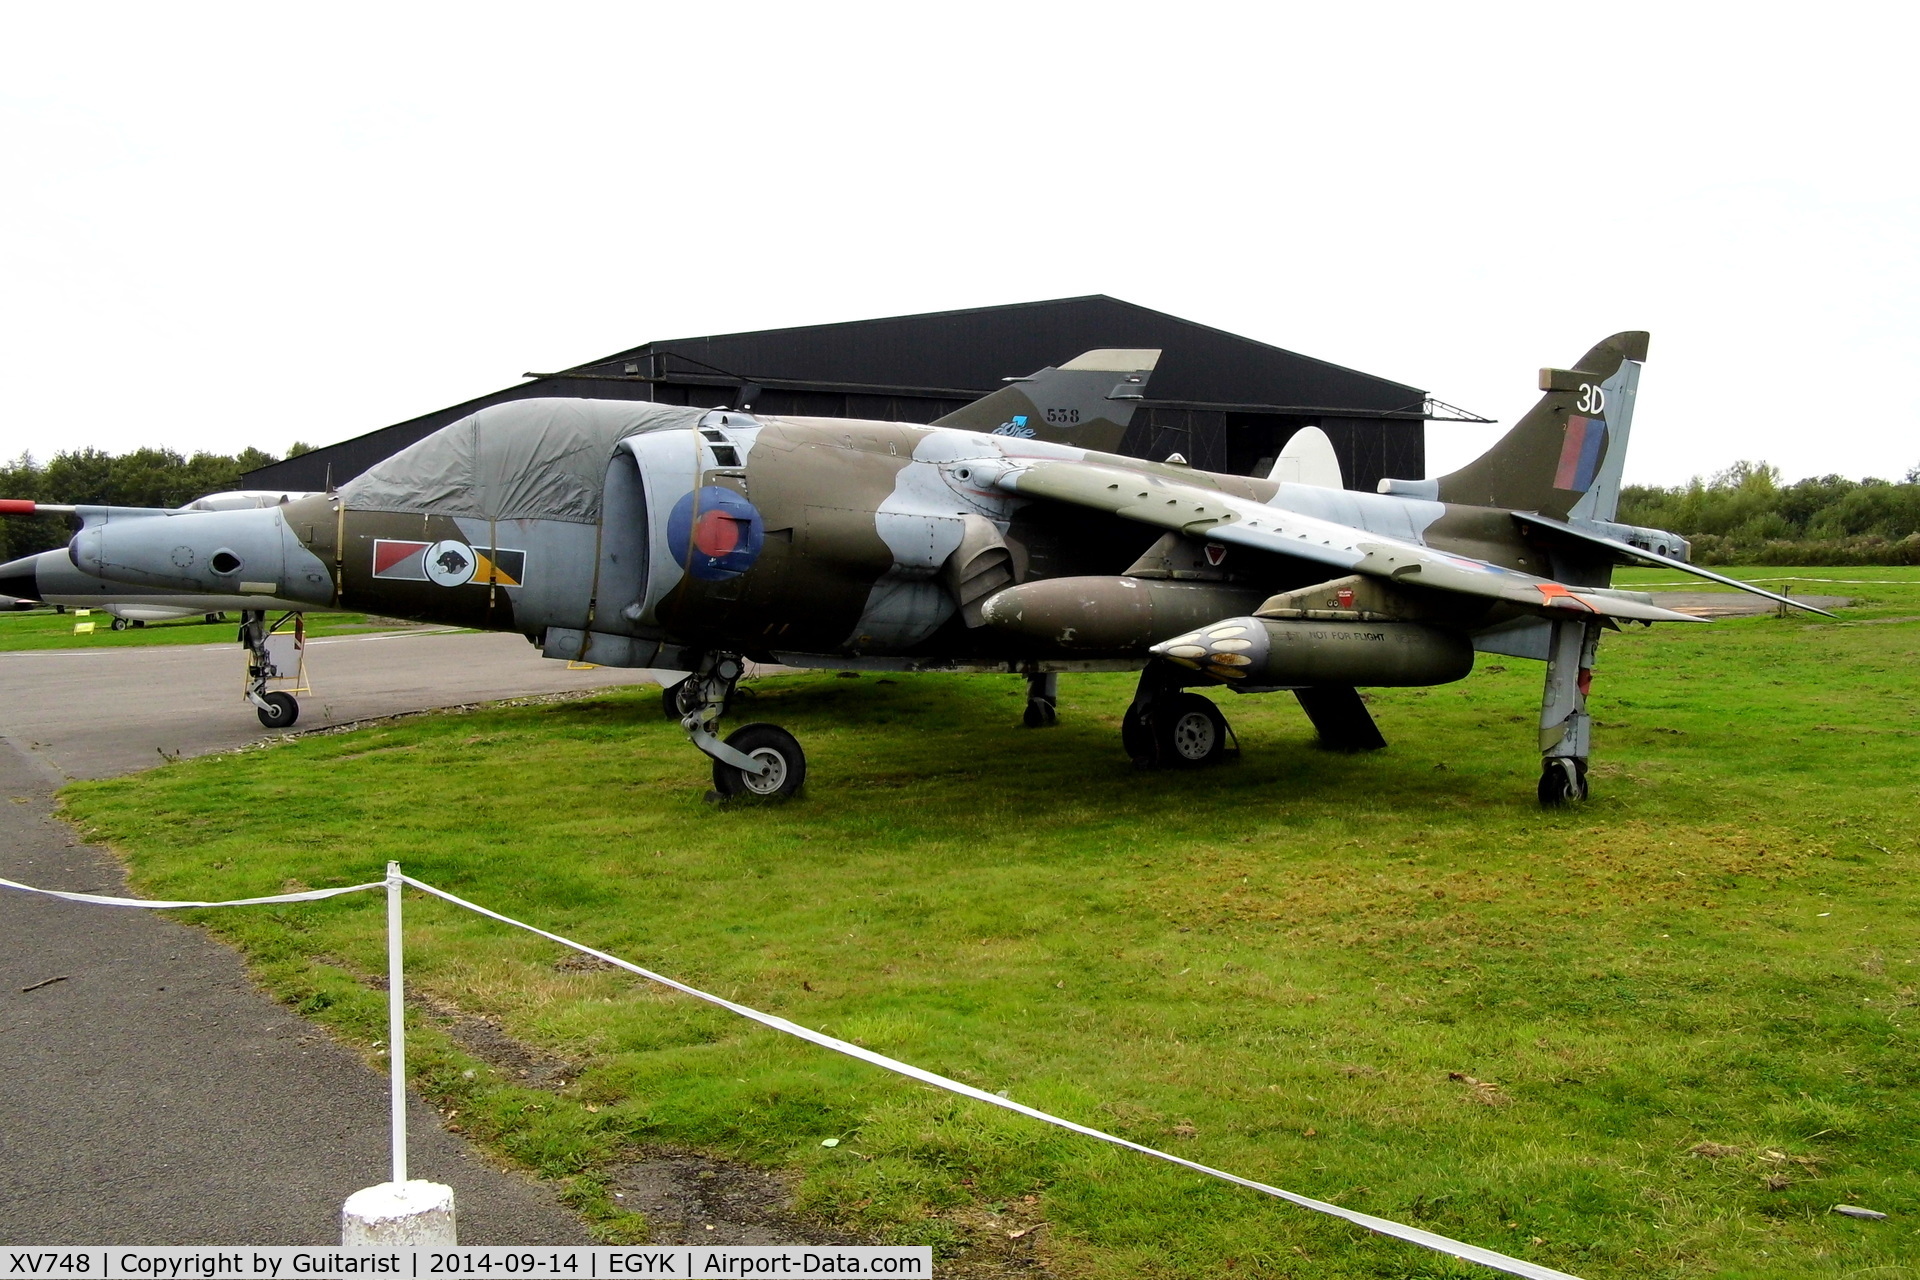 XV748, 1969 Hawker Siddeley Harrier GR.3 C/N 712011, On display at the York Air Museum